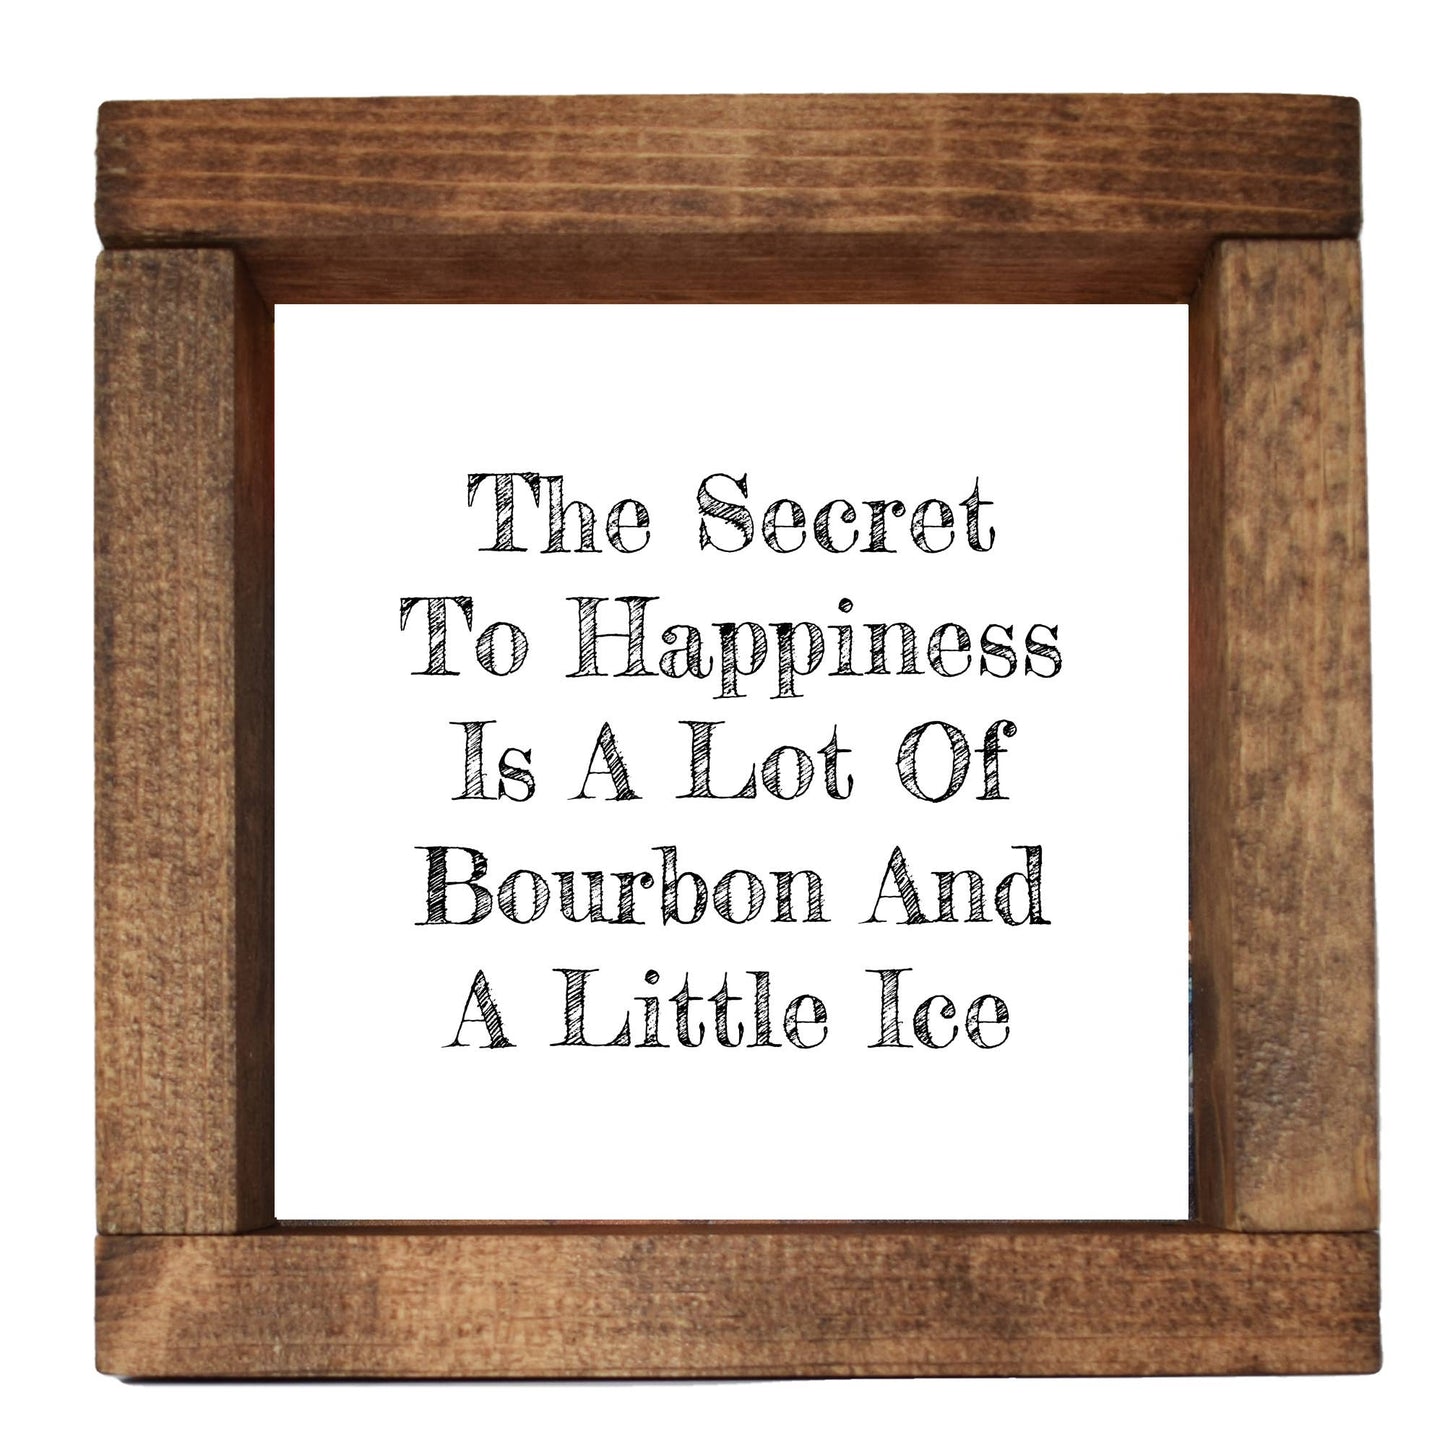 The Secret to Happiness is a Lot of Bourbon and a Little Ice